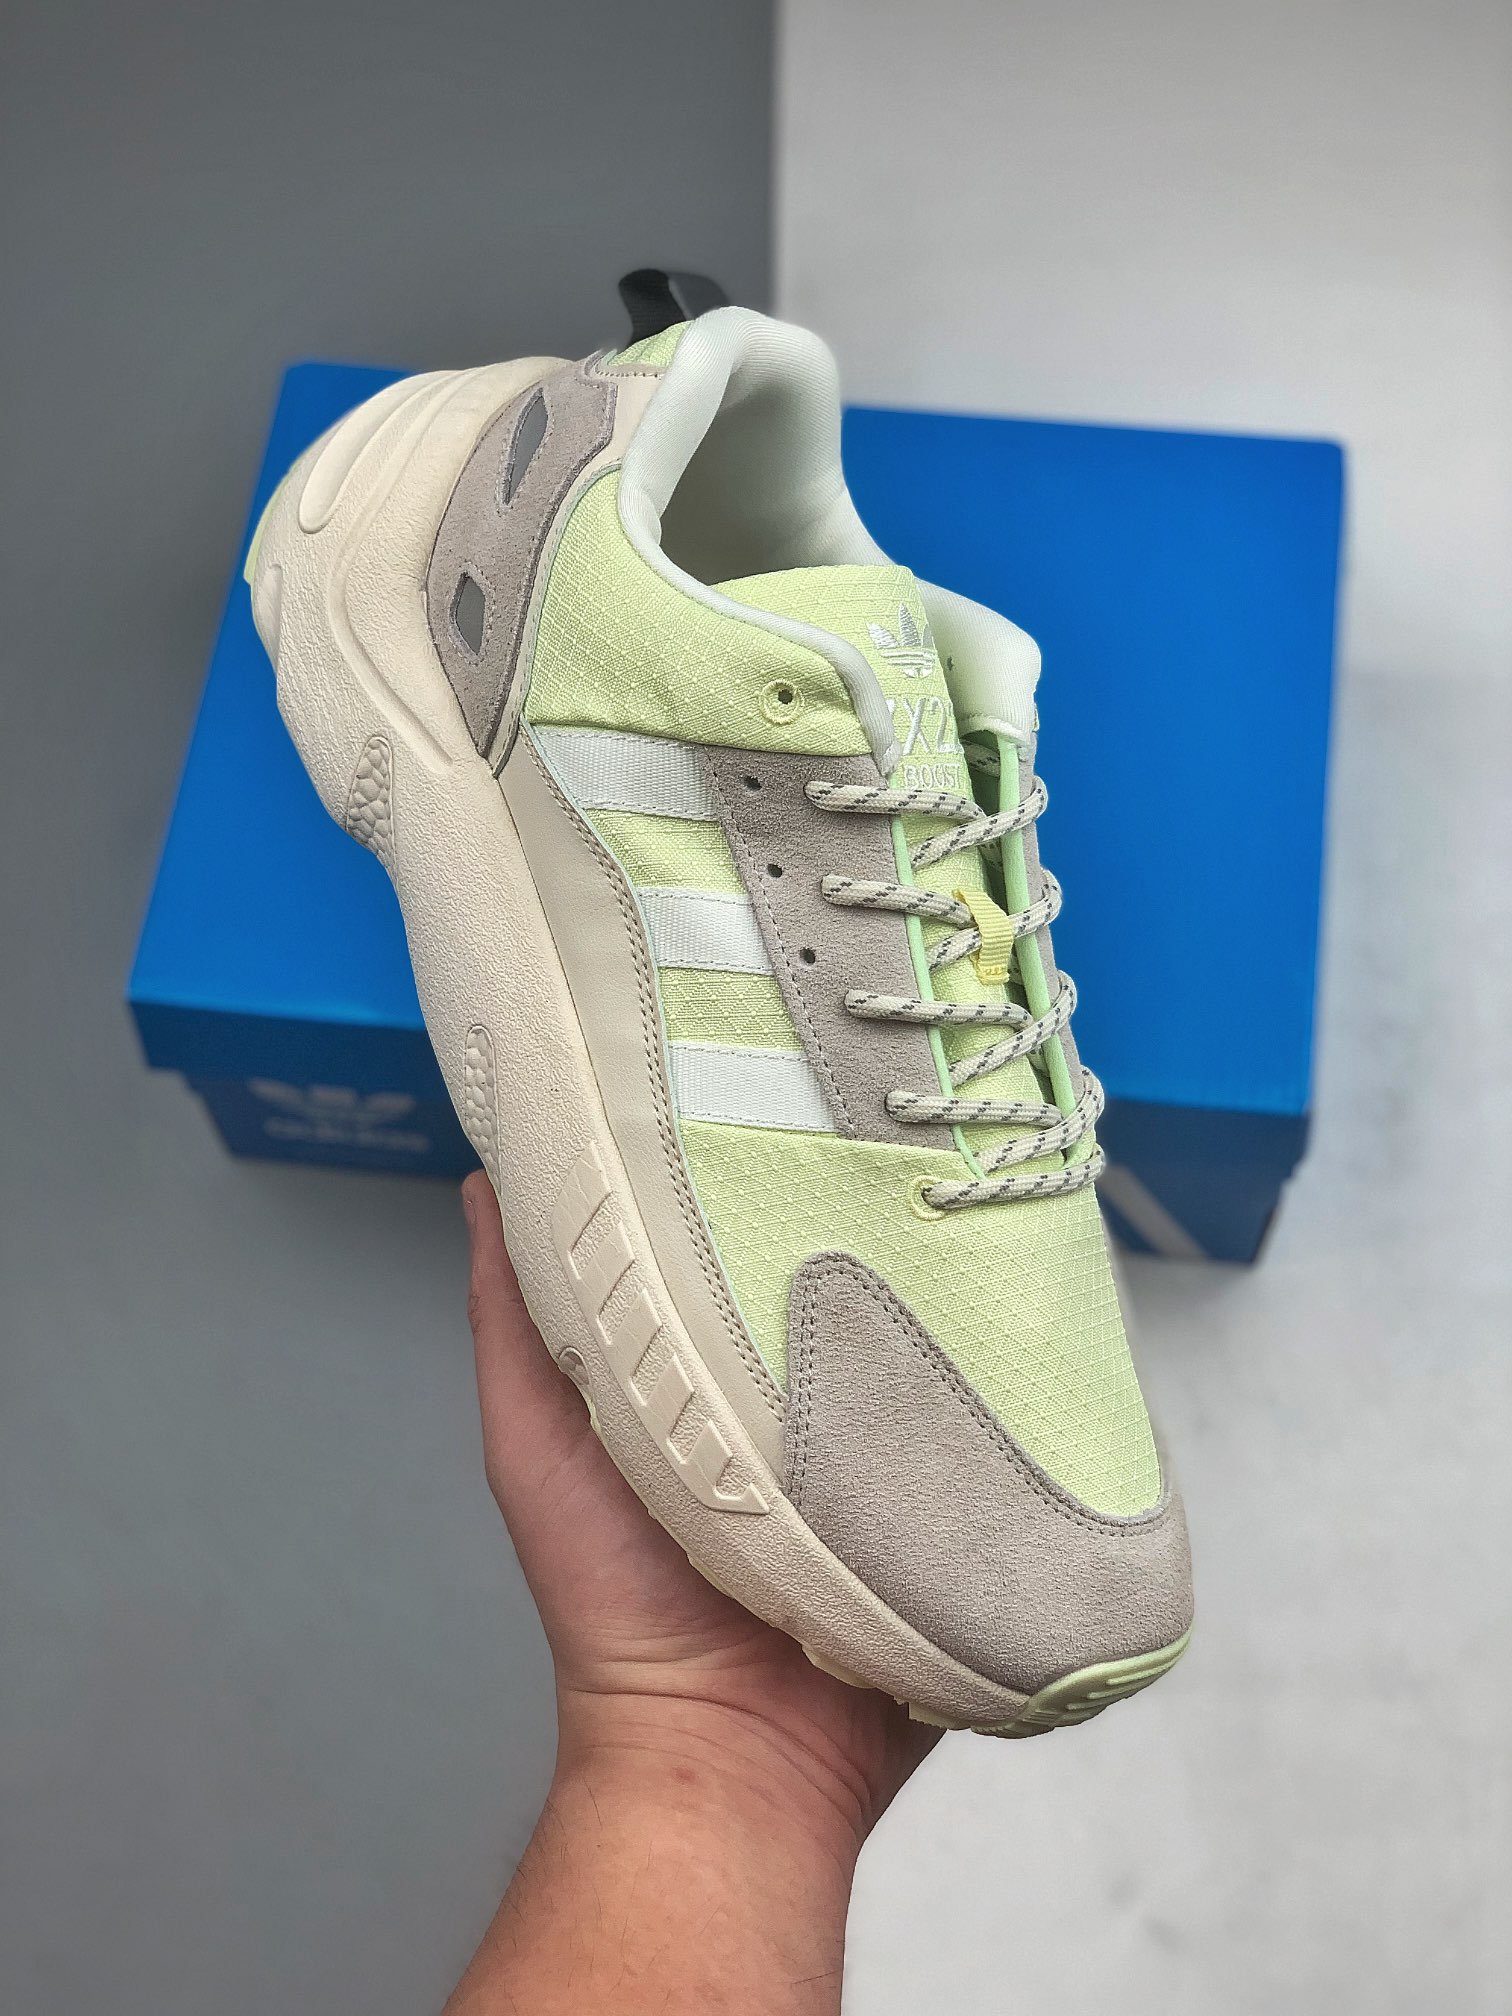 Adidas ZX 22 Boost Sand Yellow Tint GY5271 - Stylish and Comfortable Sneakers